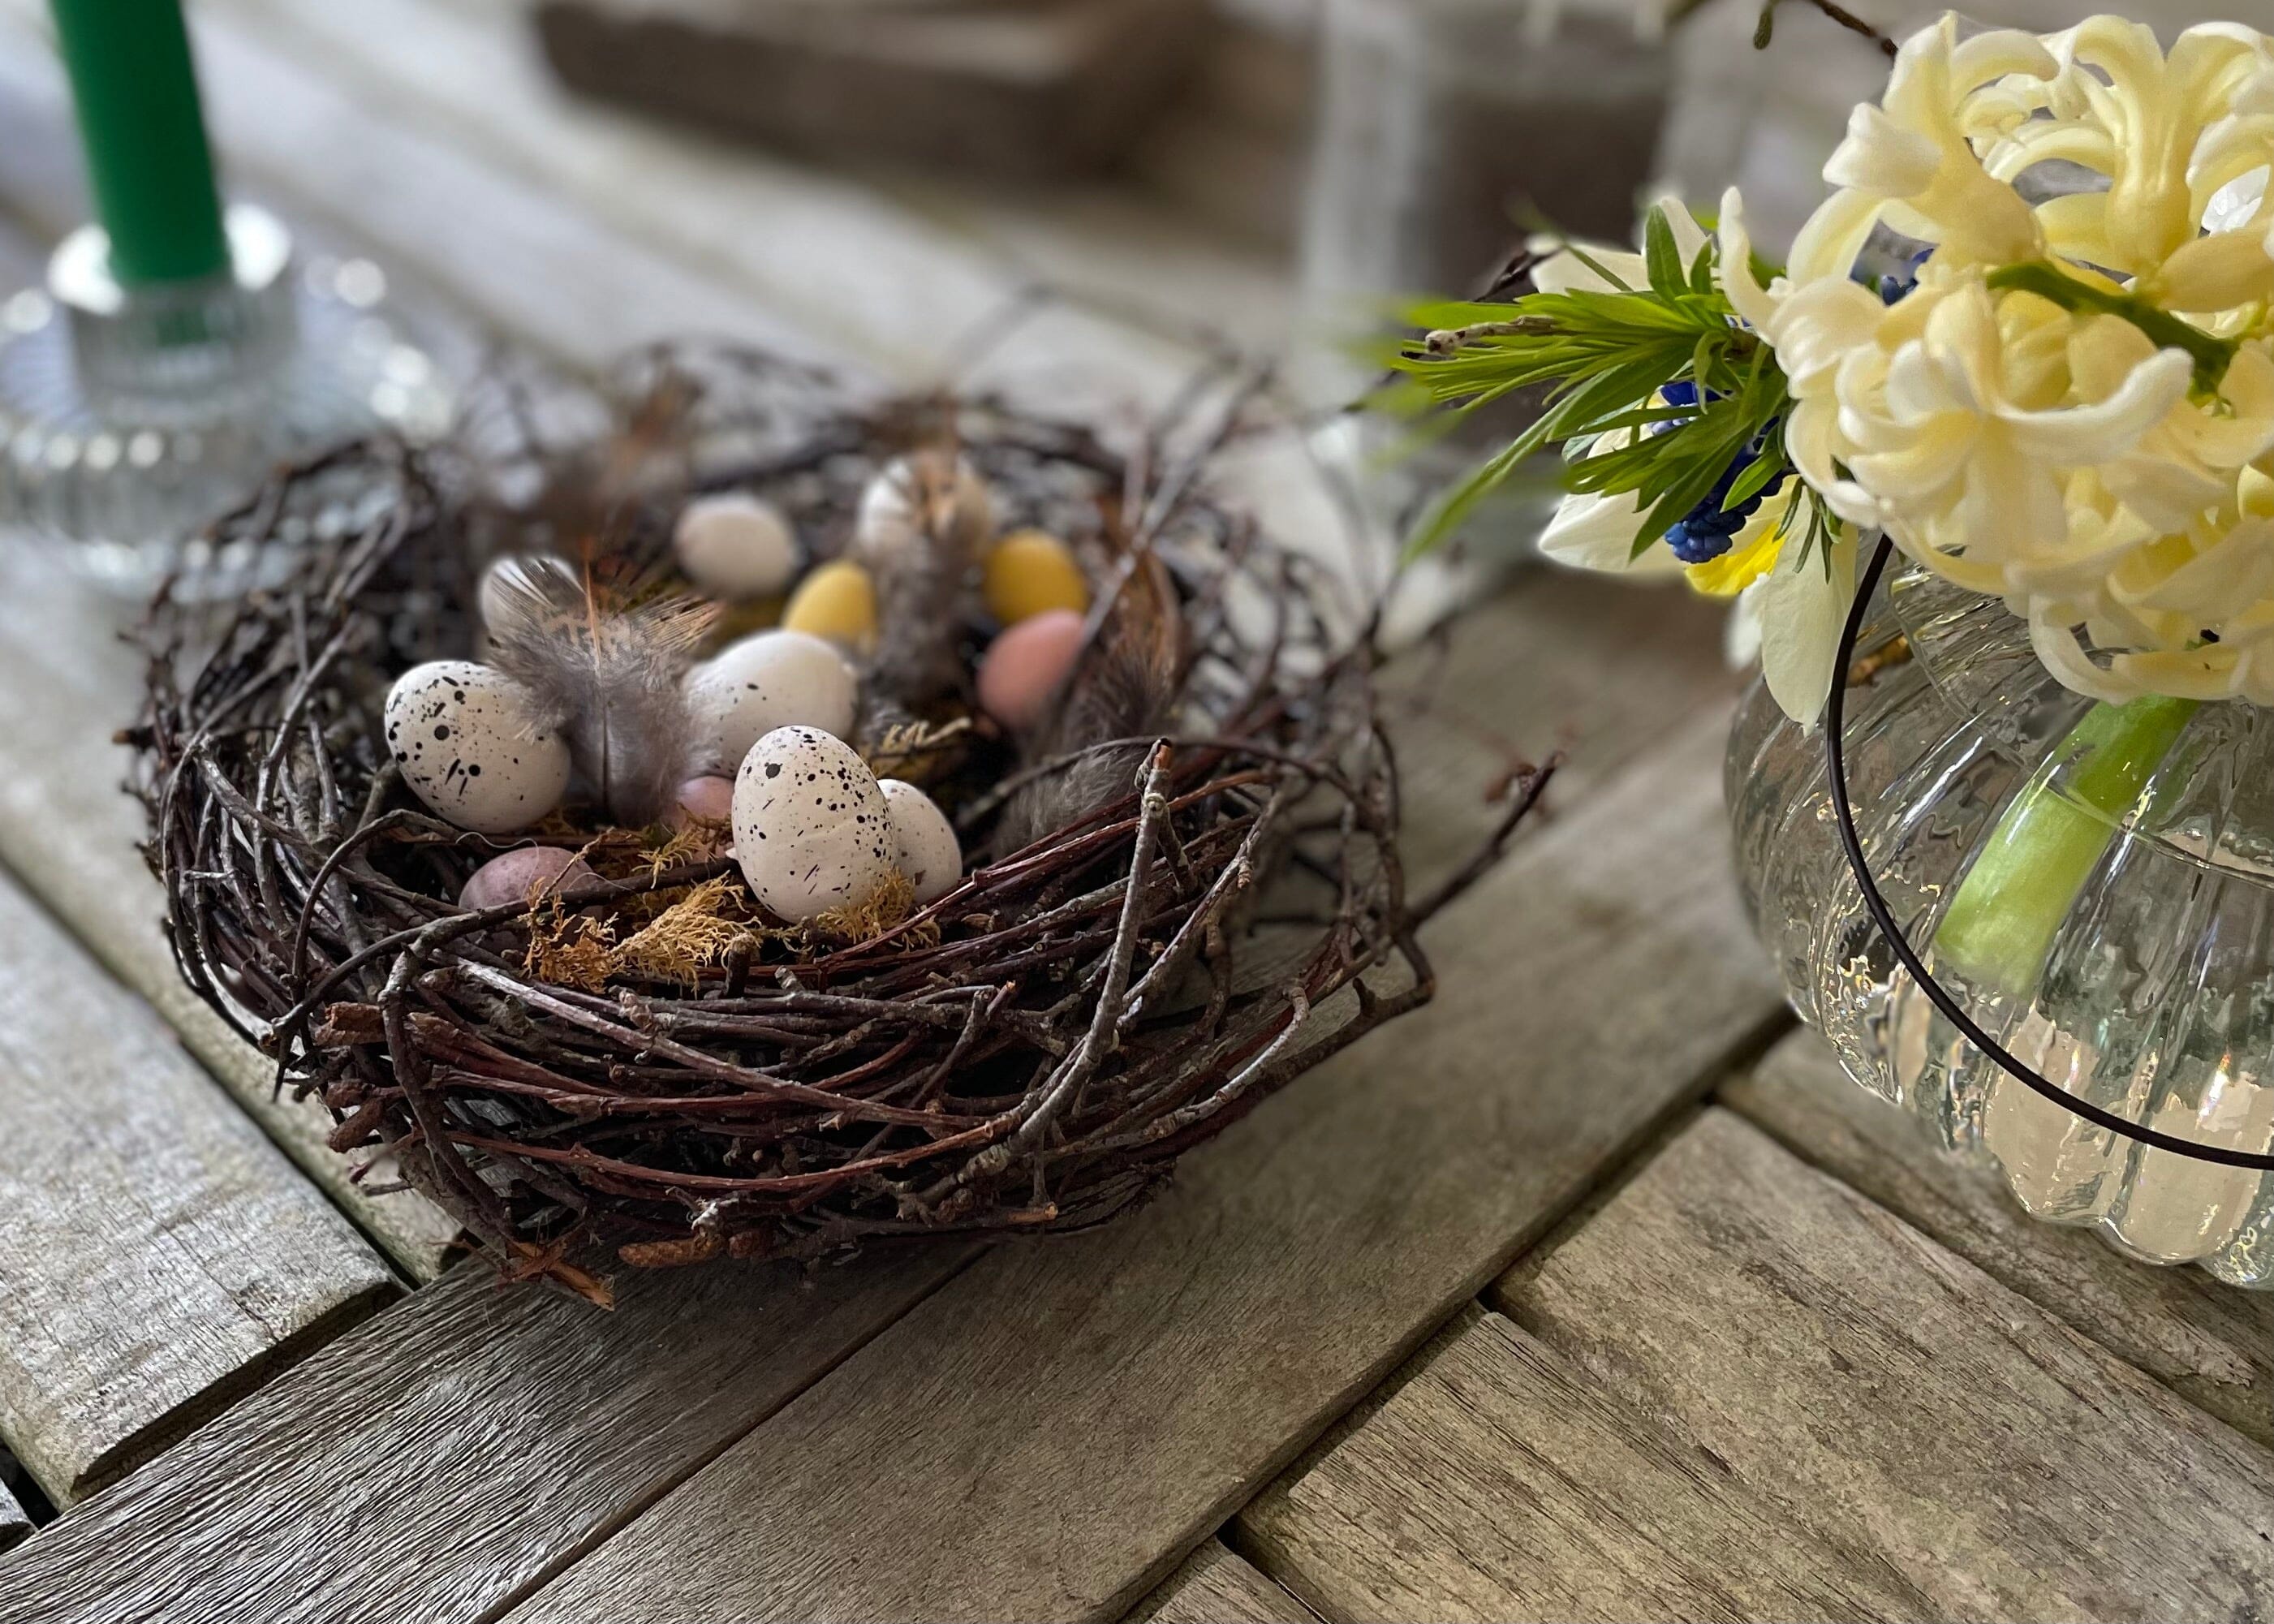 How to keep Easter décor simple, easy and fun